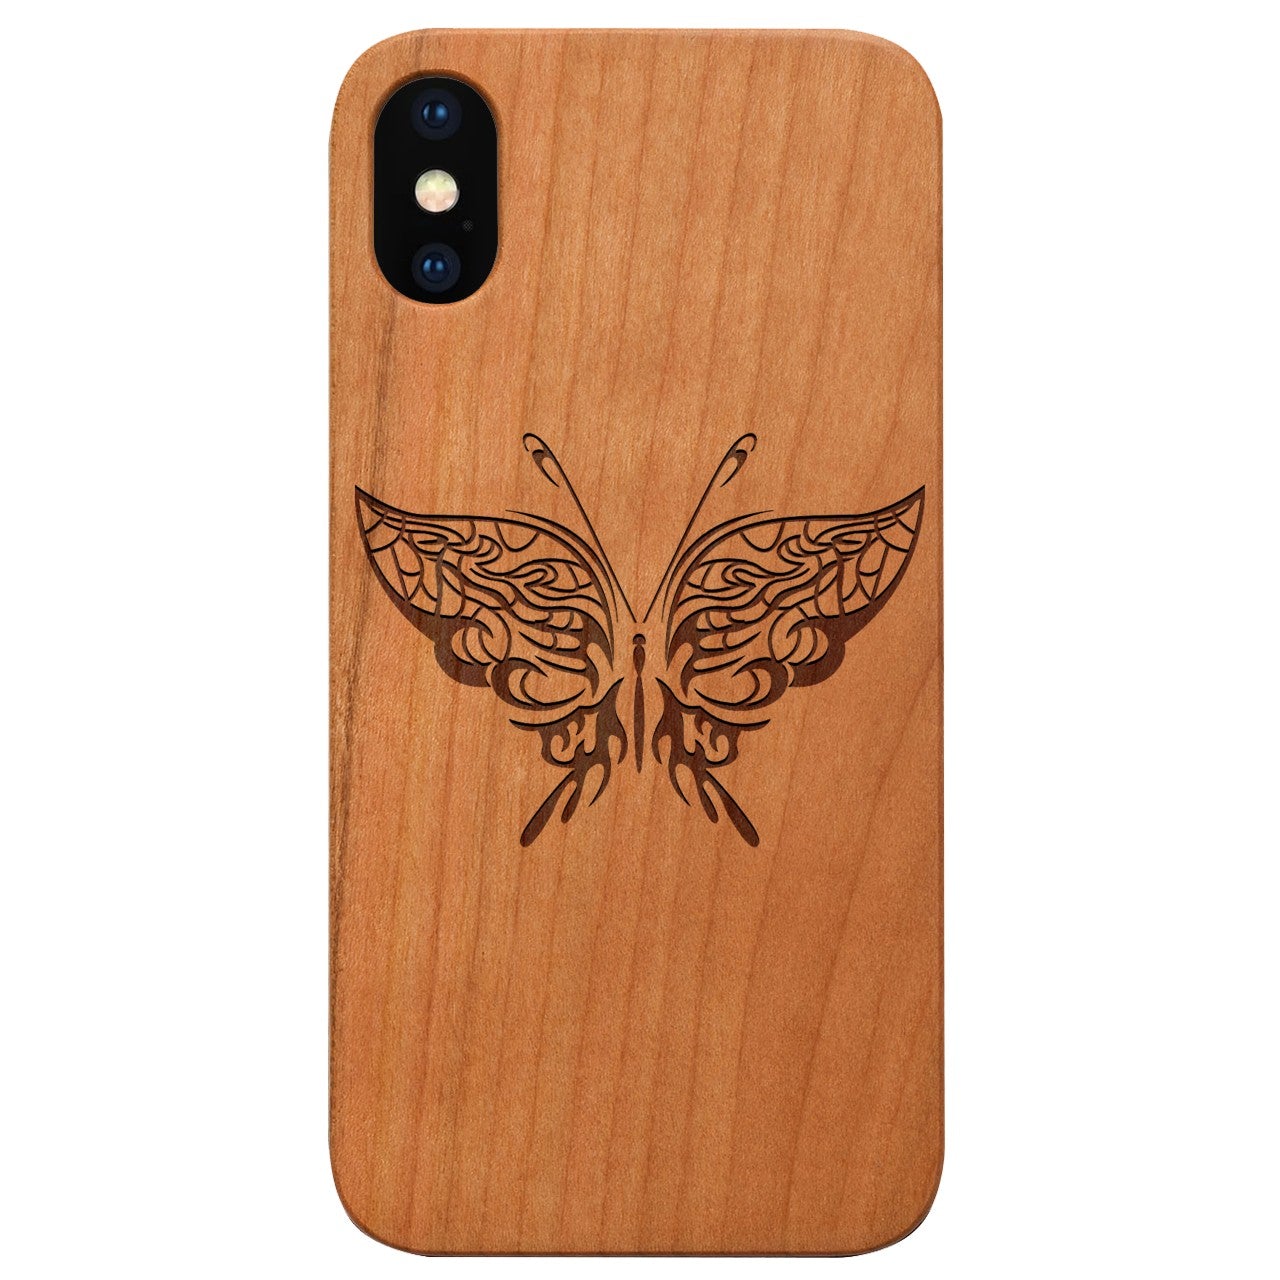  Butterfly 1 - Engraved - Wooden Phone Case - IPhone 13 Models